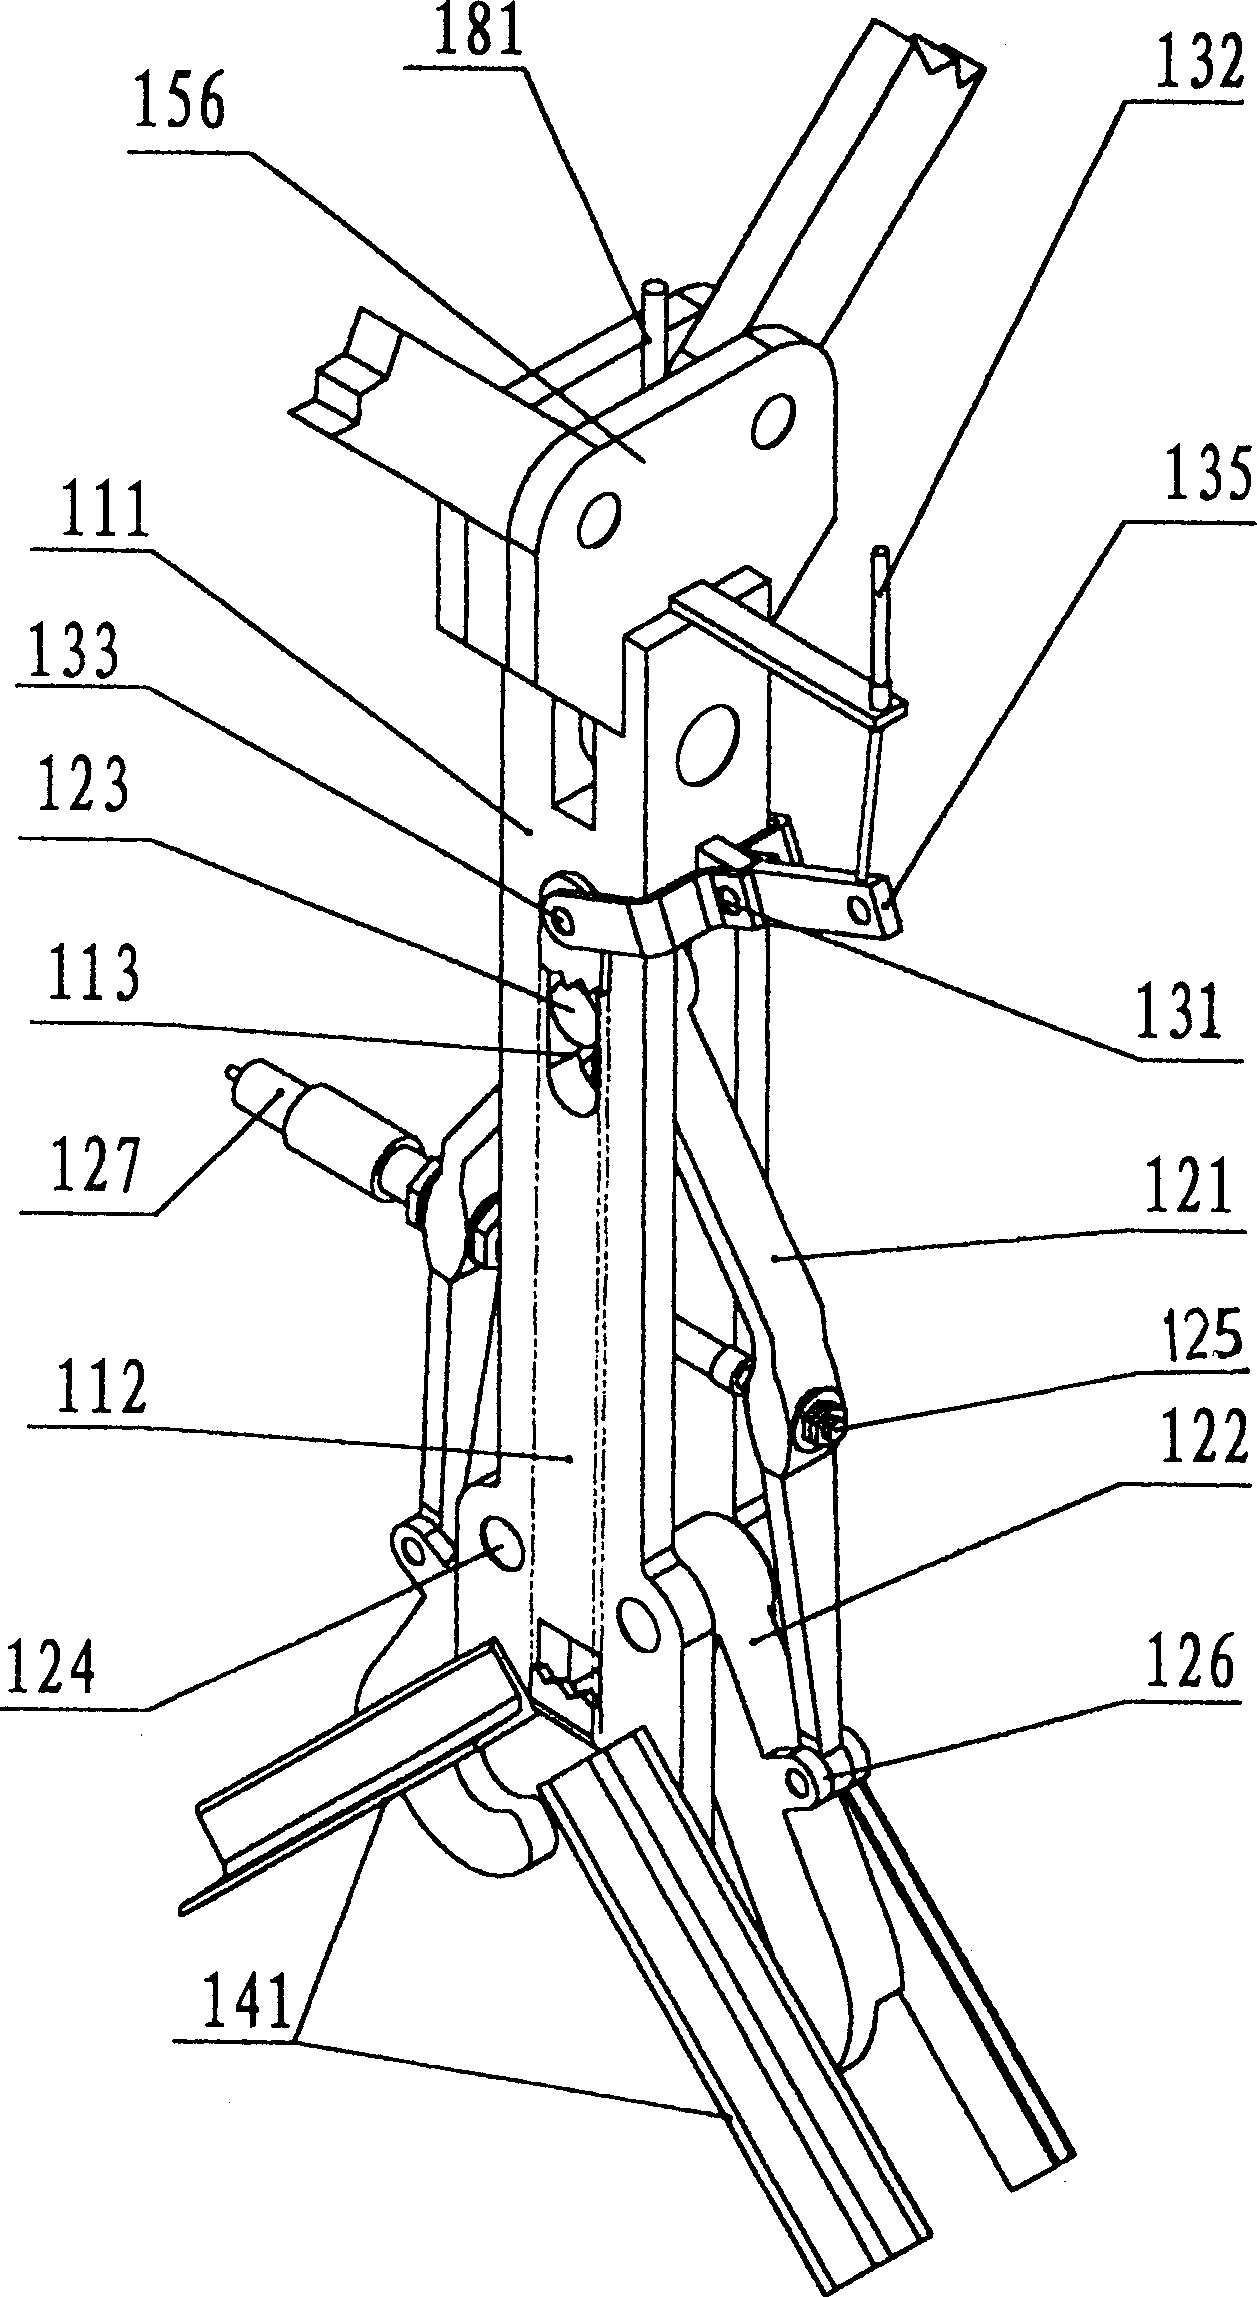 Hoisting and transport device extracting article from local high temperature area